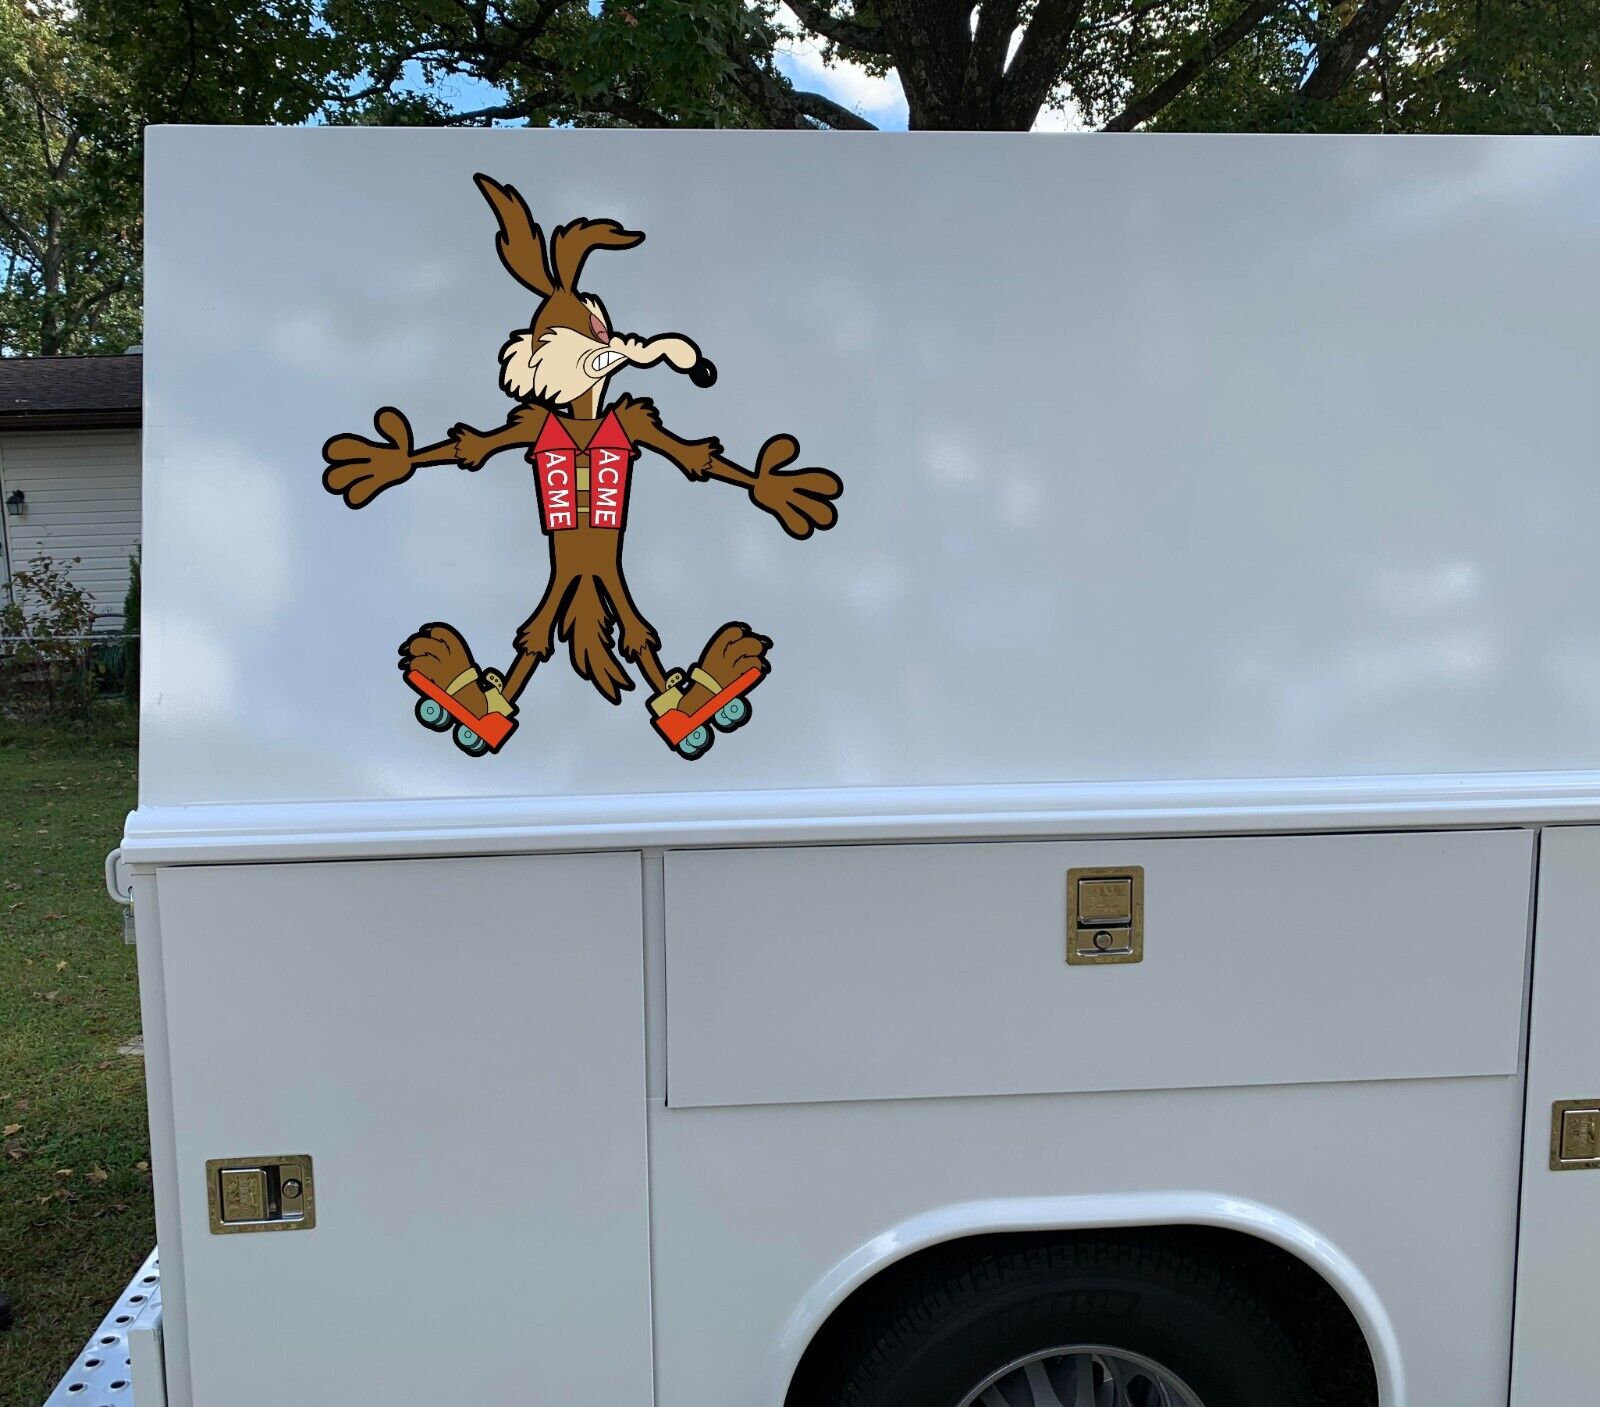 Wile E Coyote Hitting Wall Splat Wiley Vinyl Decal Sticker Wolf Funny Car Decal